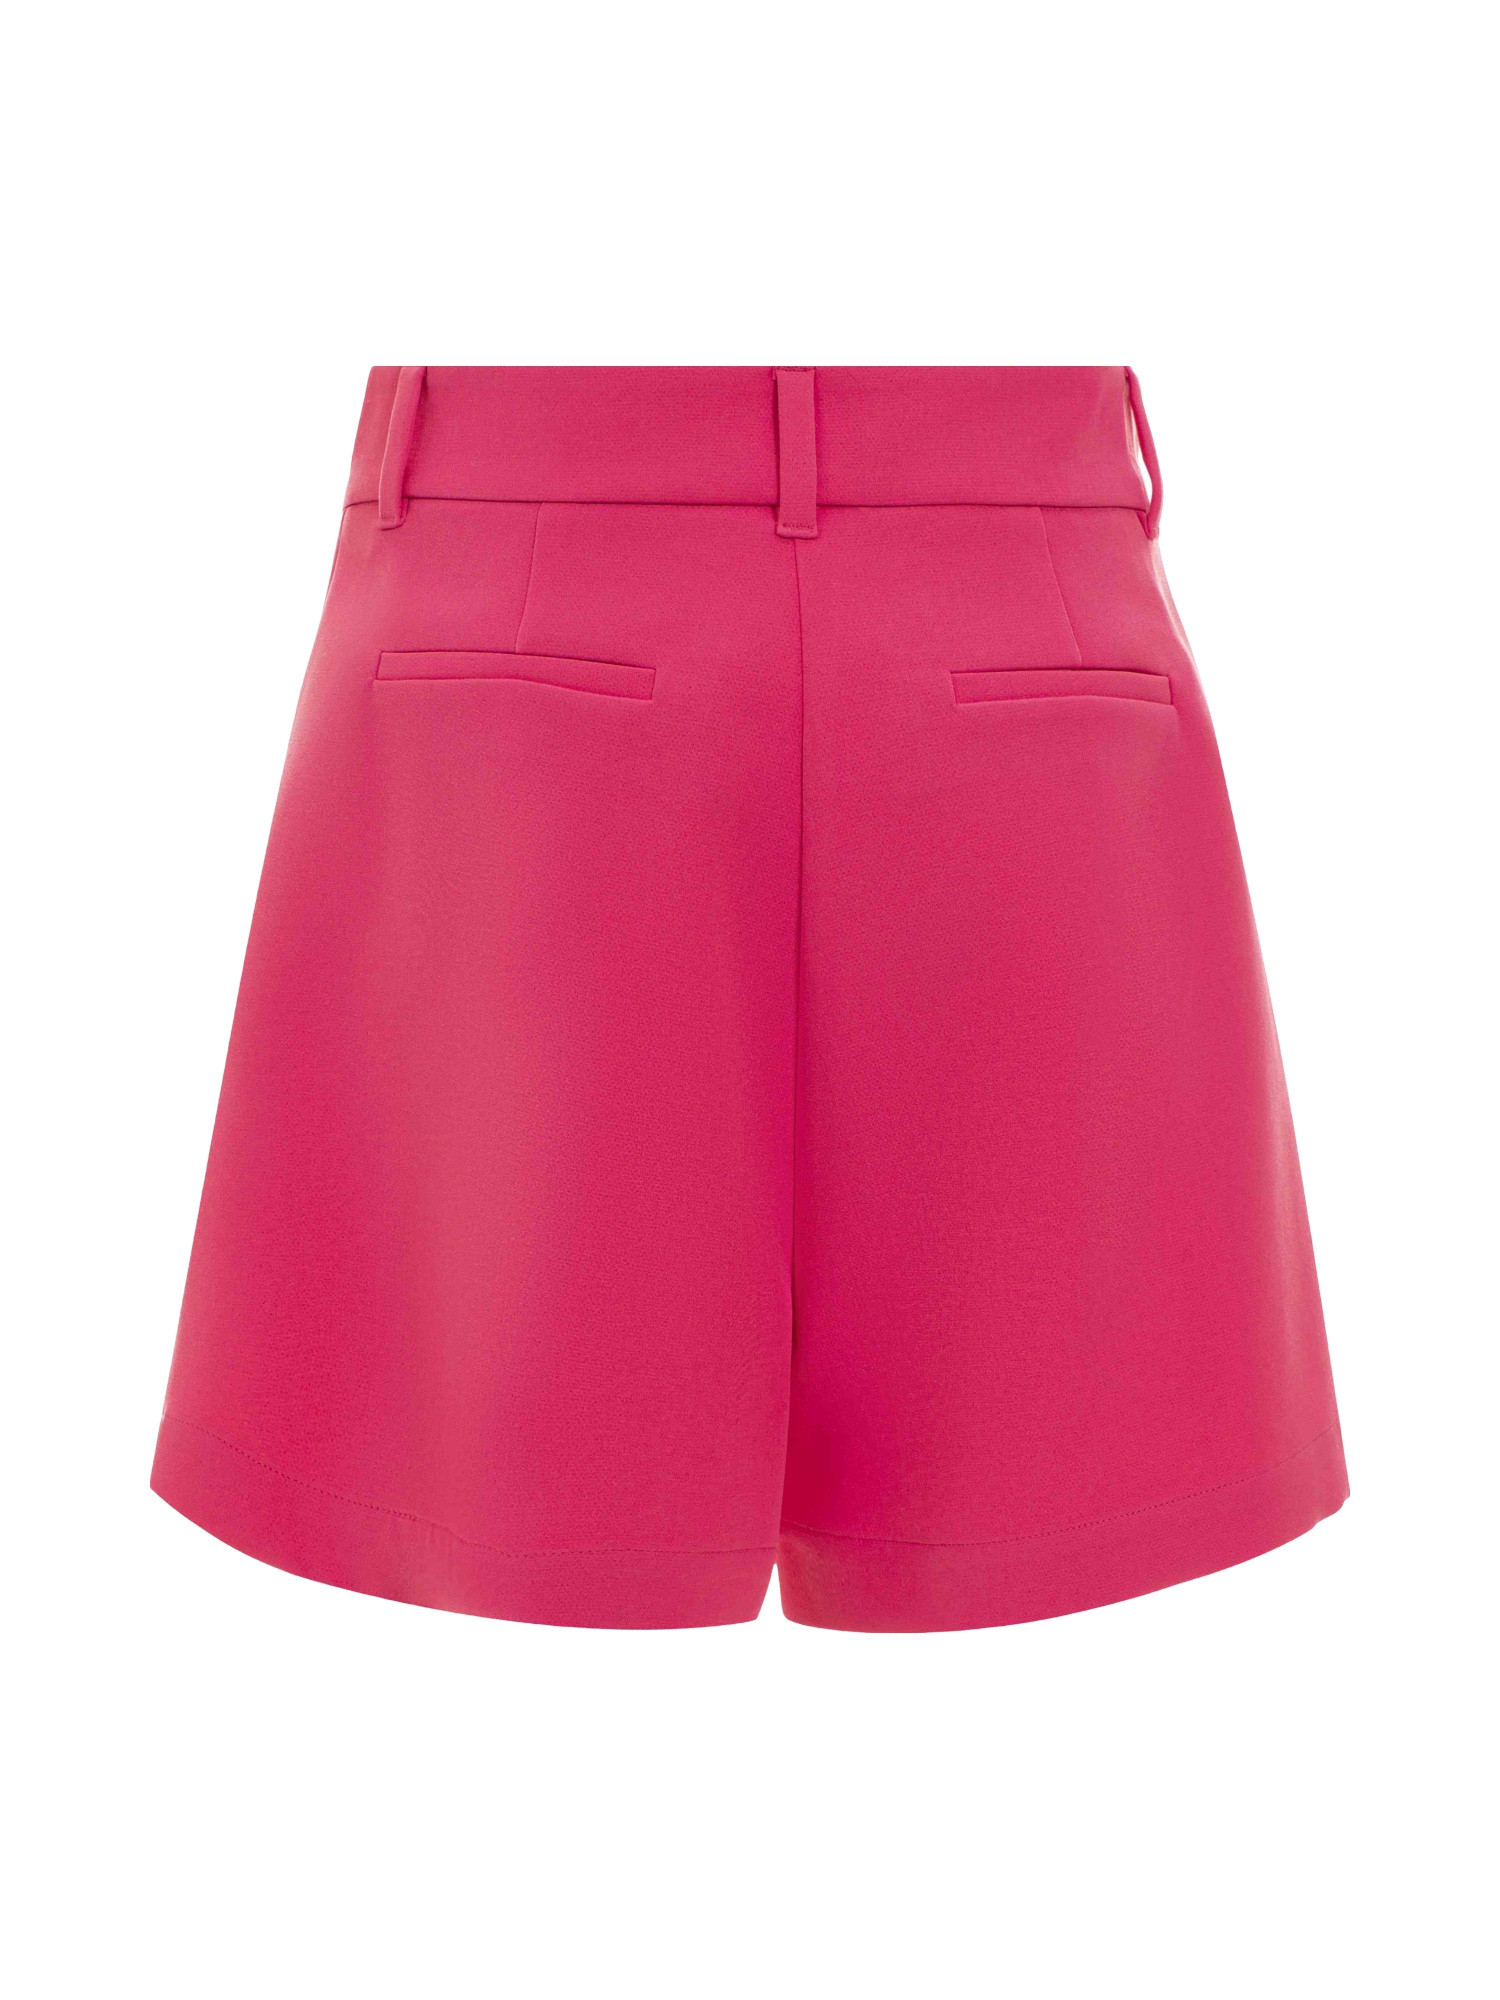 Chiara Ferragni - Bermuda shorts with pences and jewel button, Pink Fuchsia, large image number 1